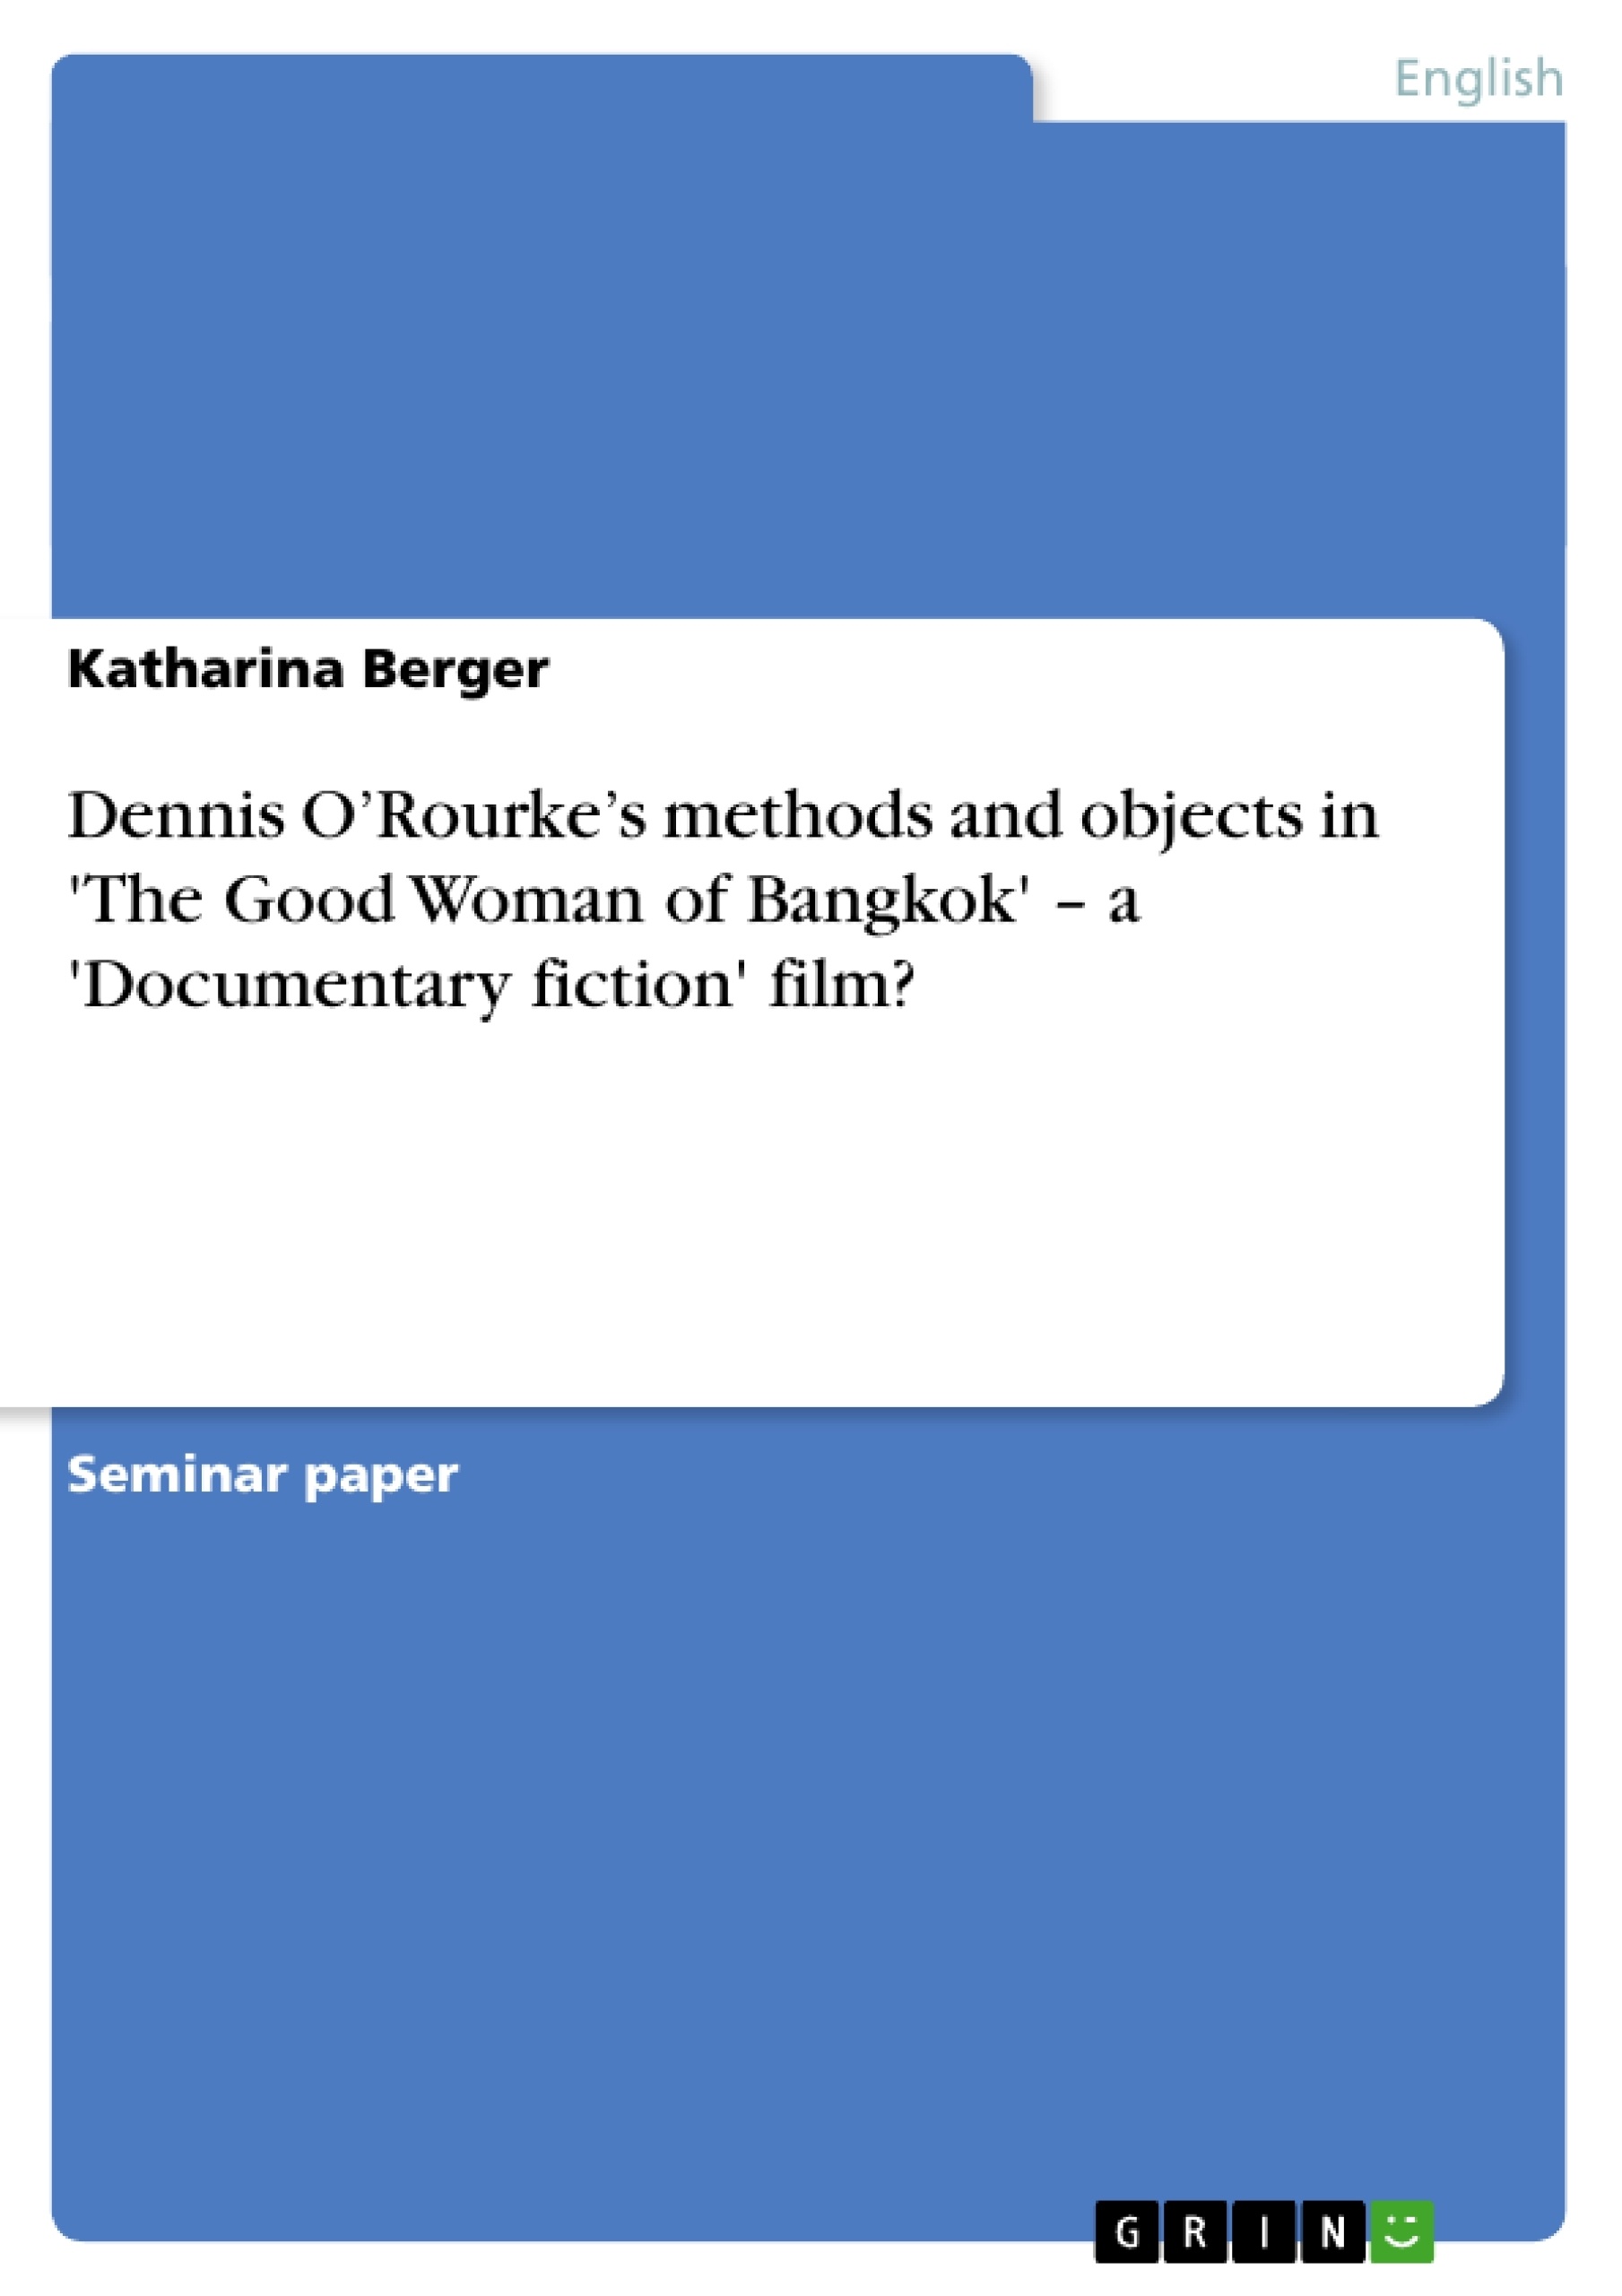 Title: Dennis O’Rourke’s methods and objects in 'The Good Woman of Bangkok' – a 'Documentary fiction' film?